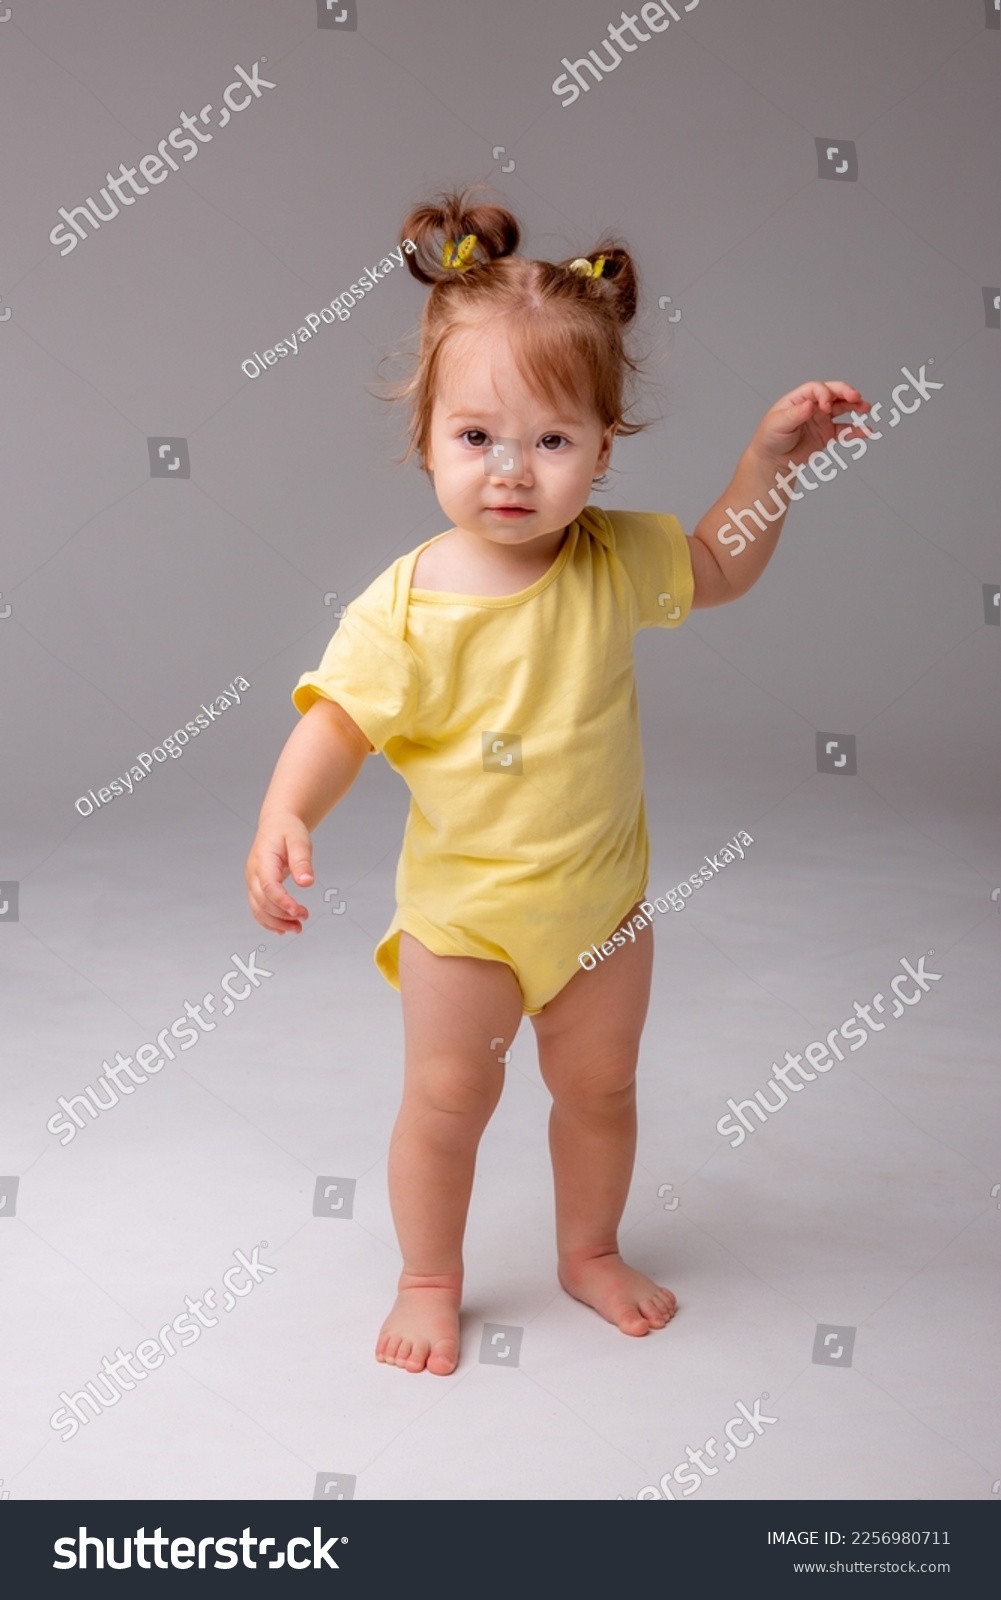 baby girl starting to walk takes her first steps on a white background #2256980711